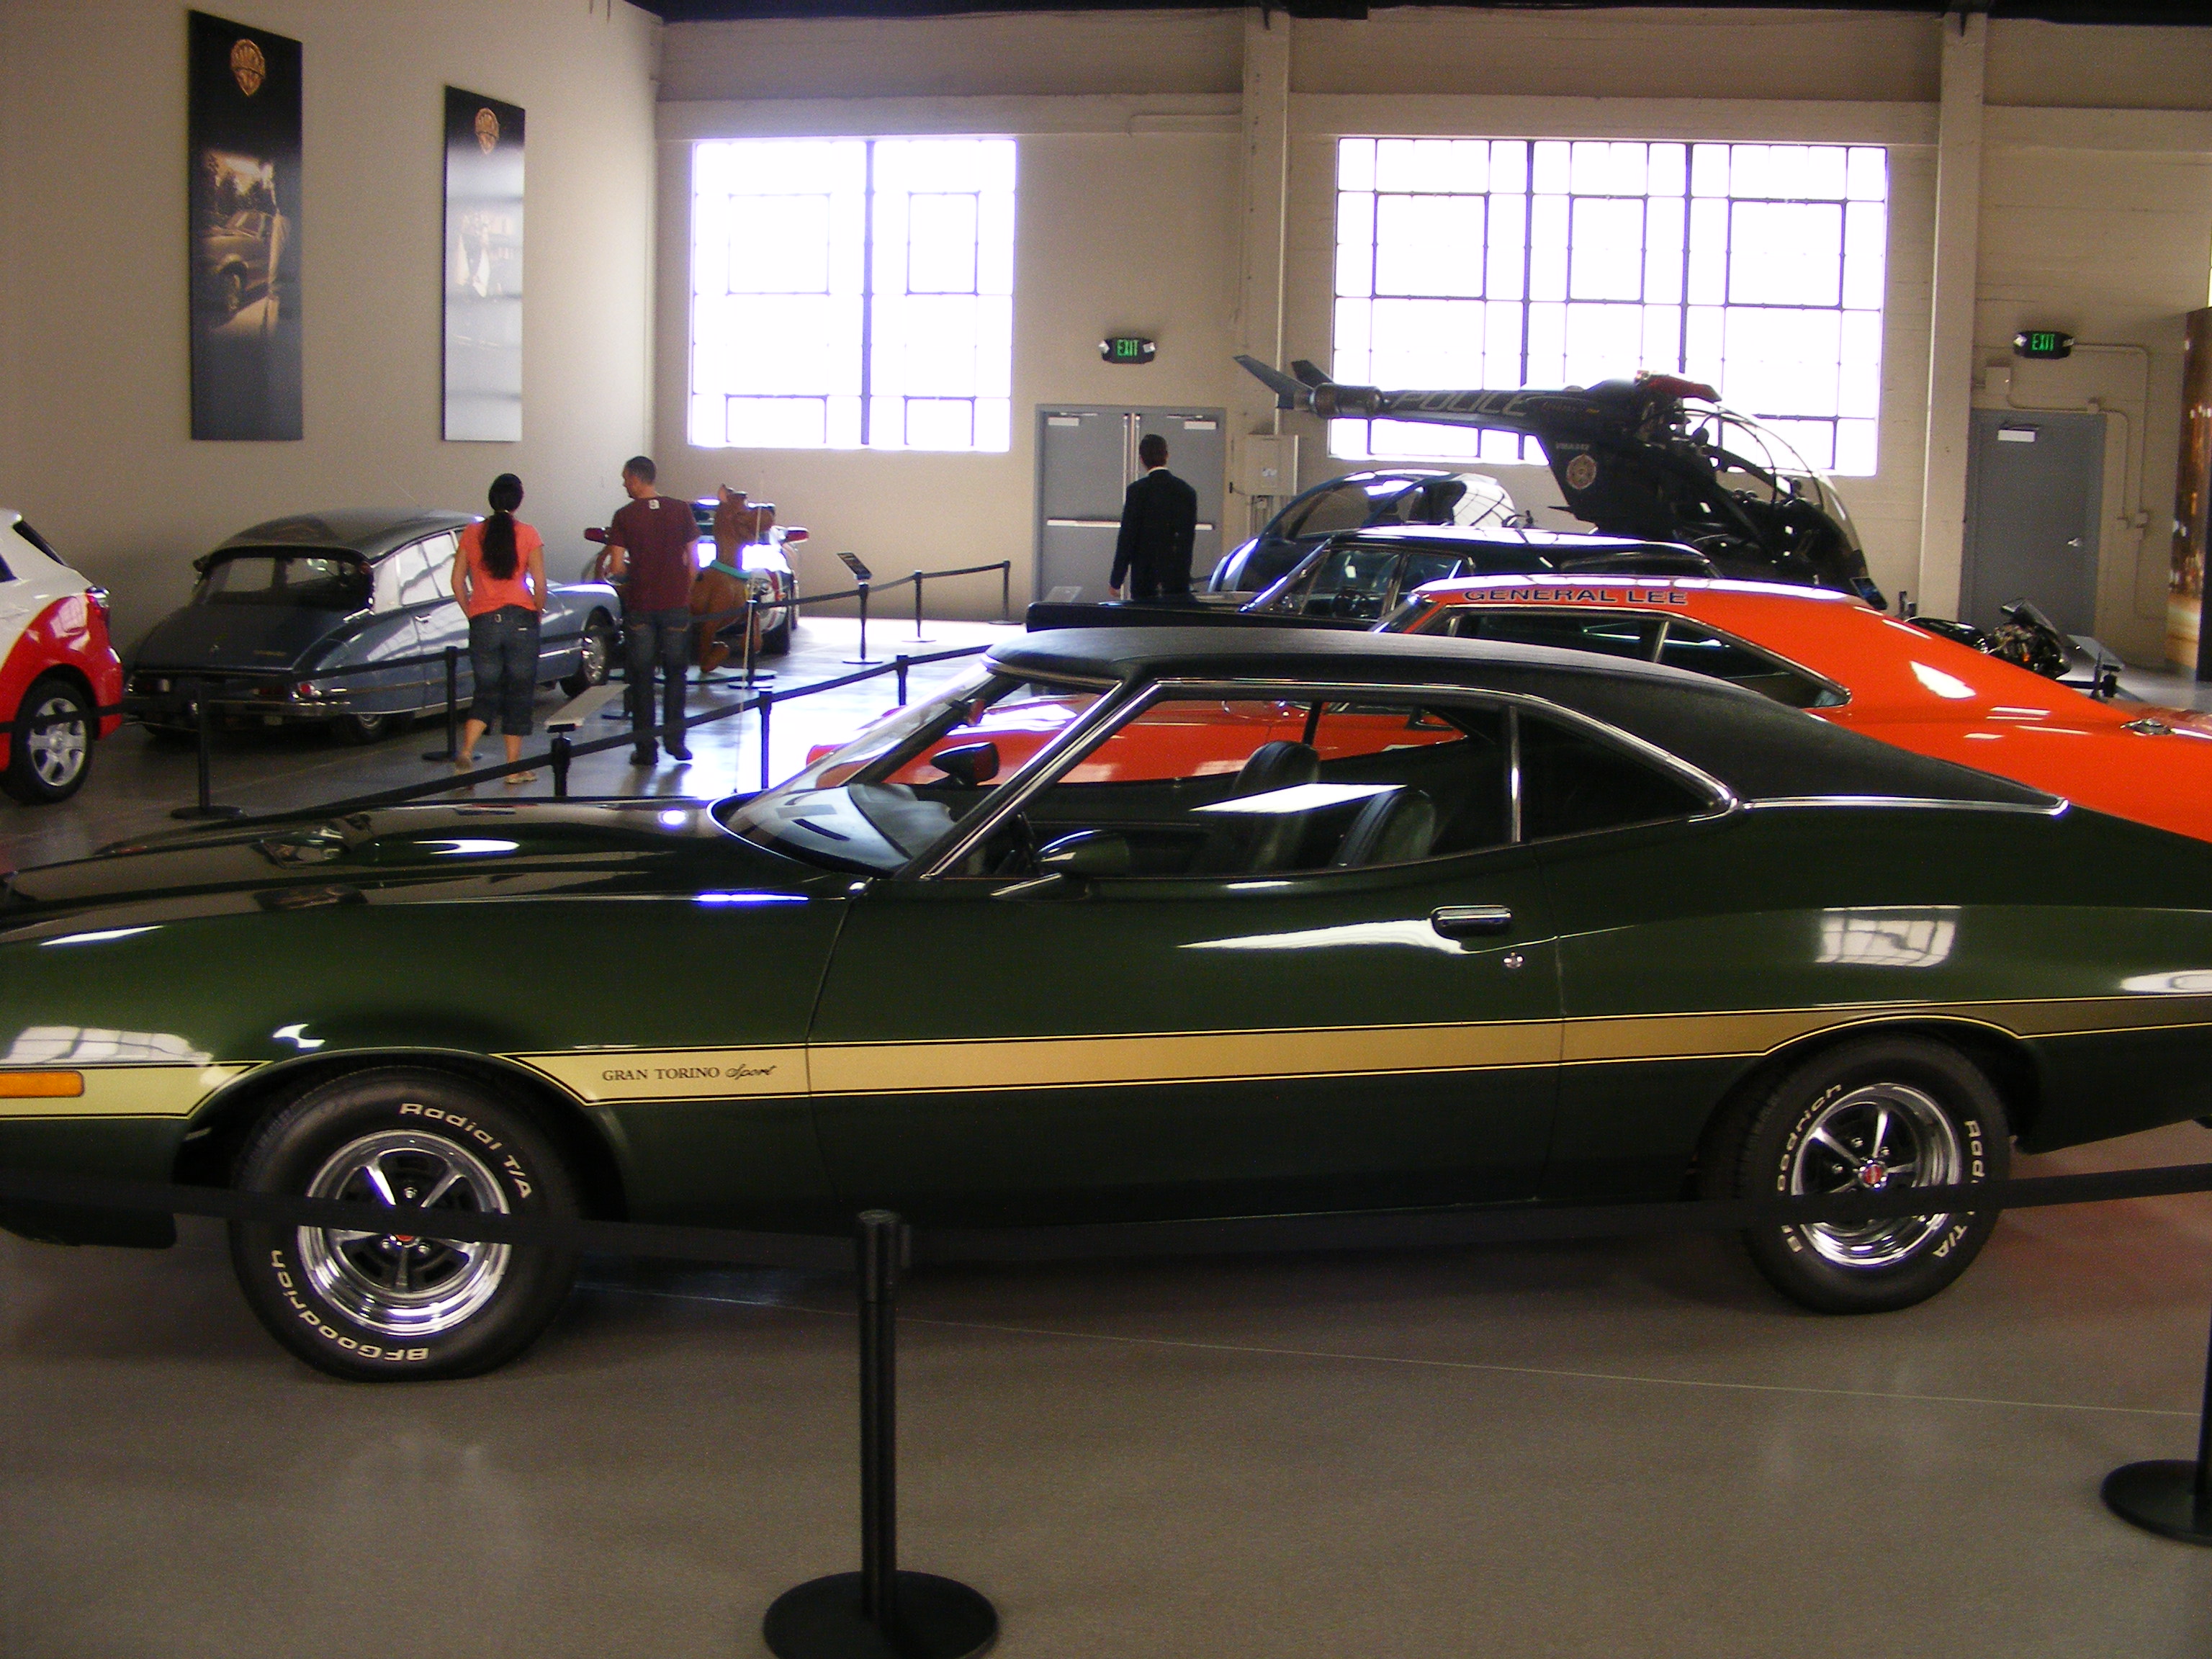 Here is the GRAN TORINO from Clint Eastwood’s film, GRAN TORINO ...